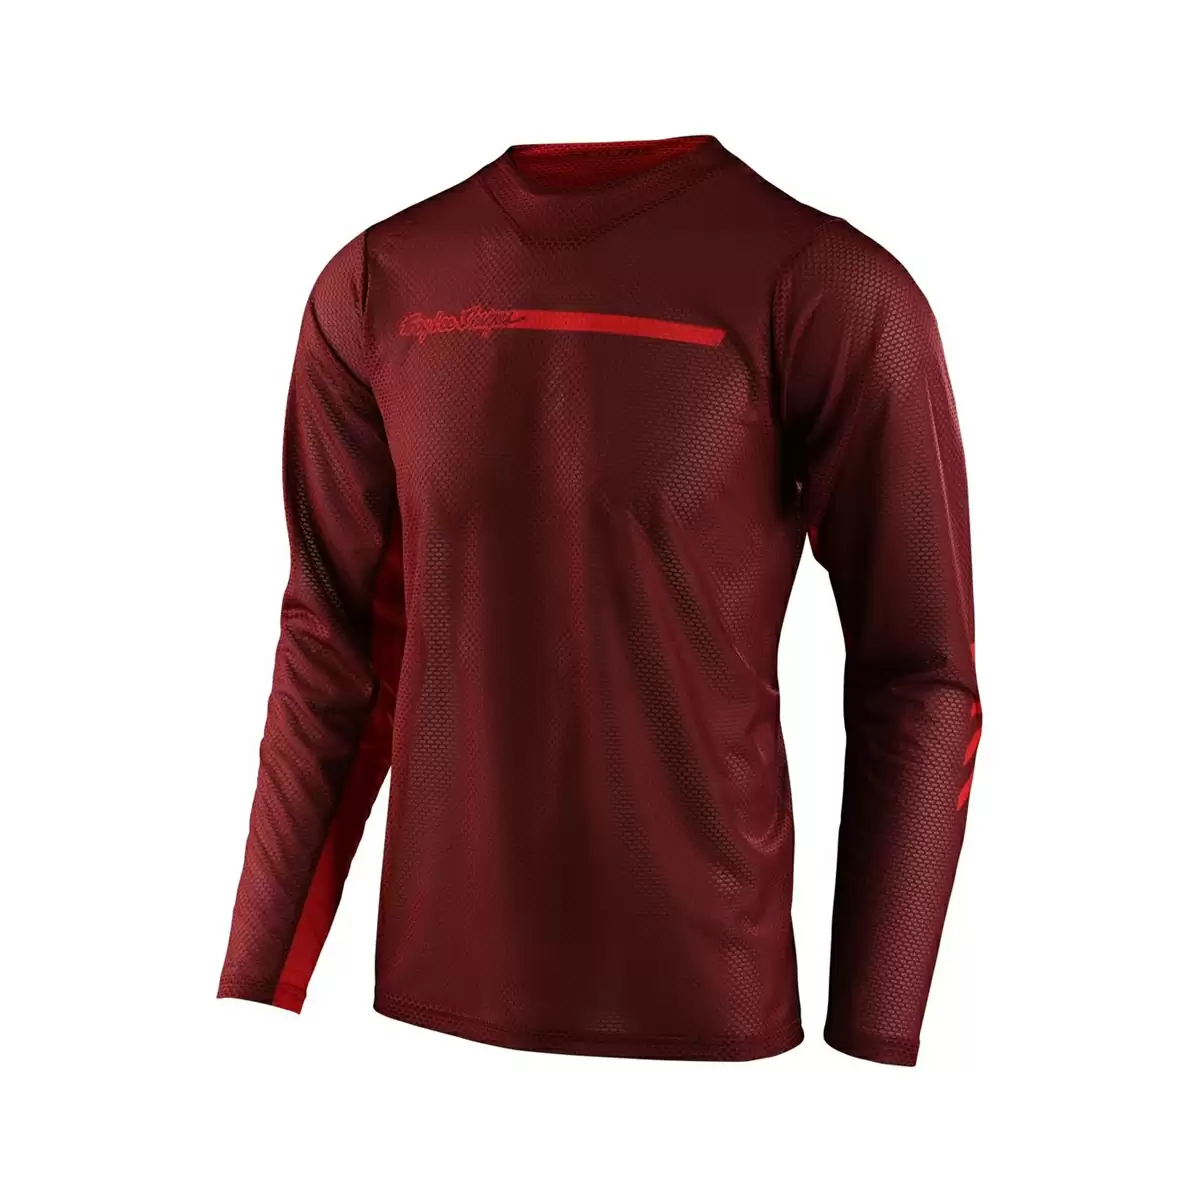 Jersey Skyline Air Channel Long-Sleeve Red Size M - image